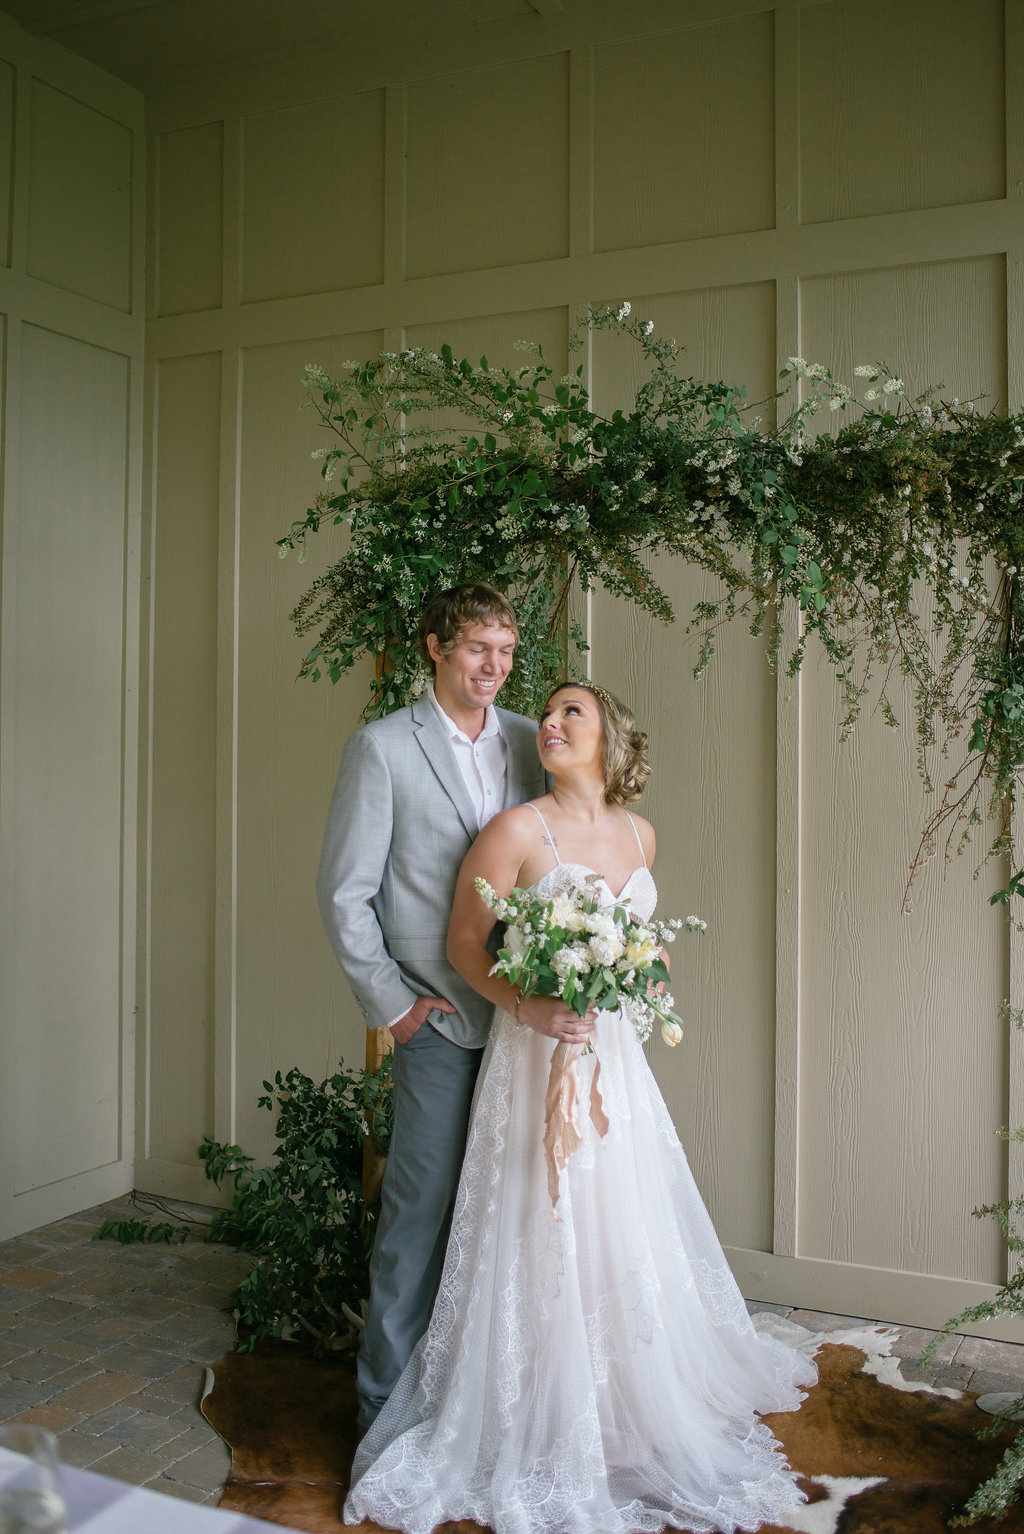 Spring Wedding Ideas | Emilee Mae Photography | The Day's Design 